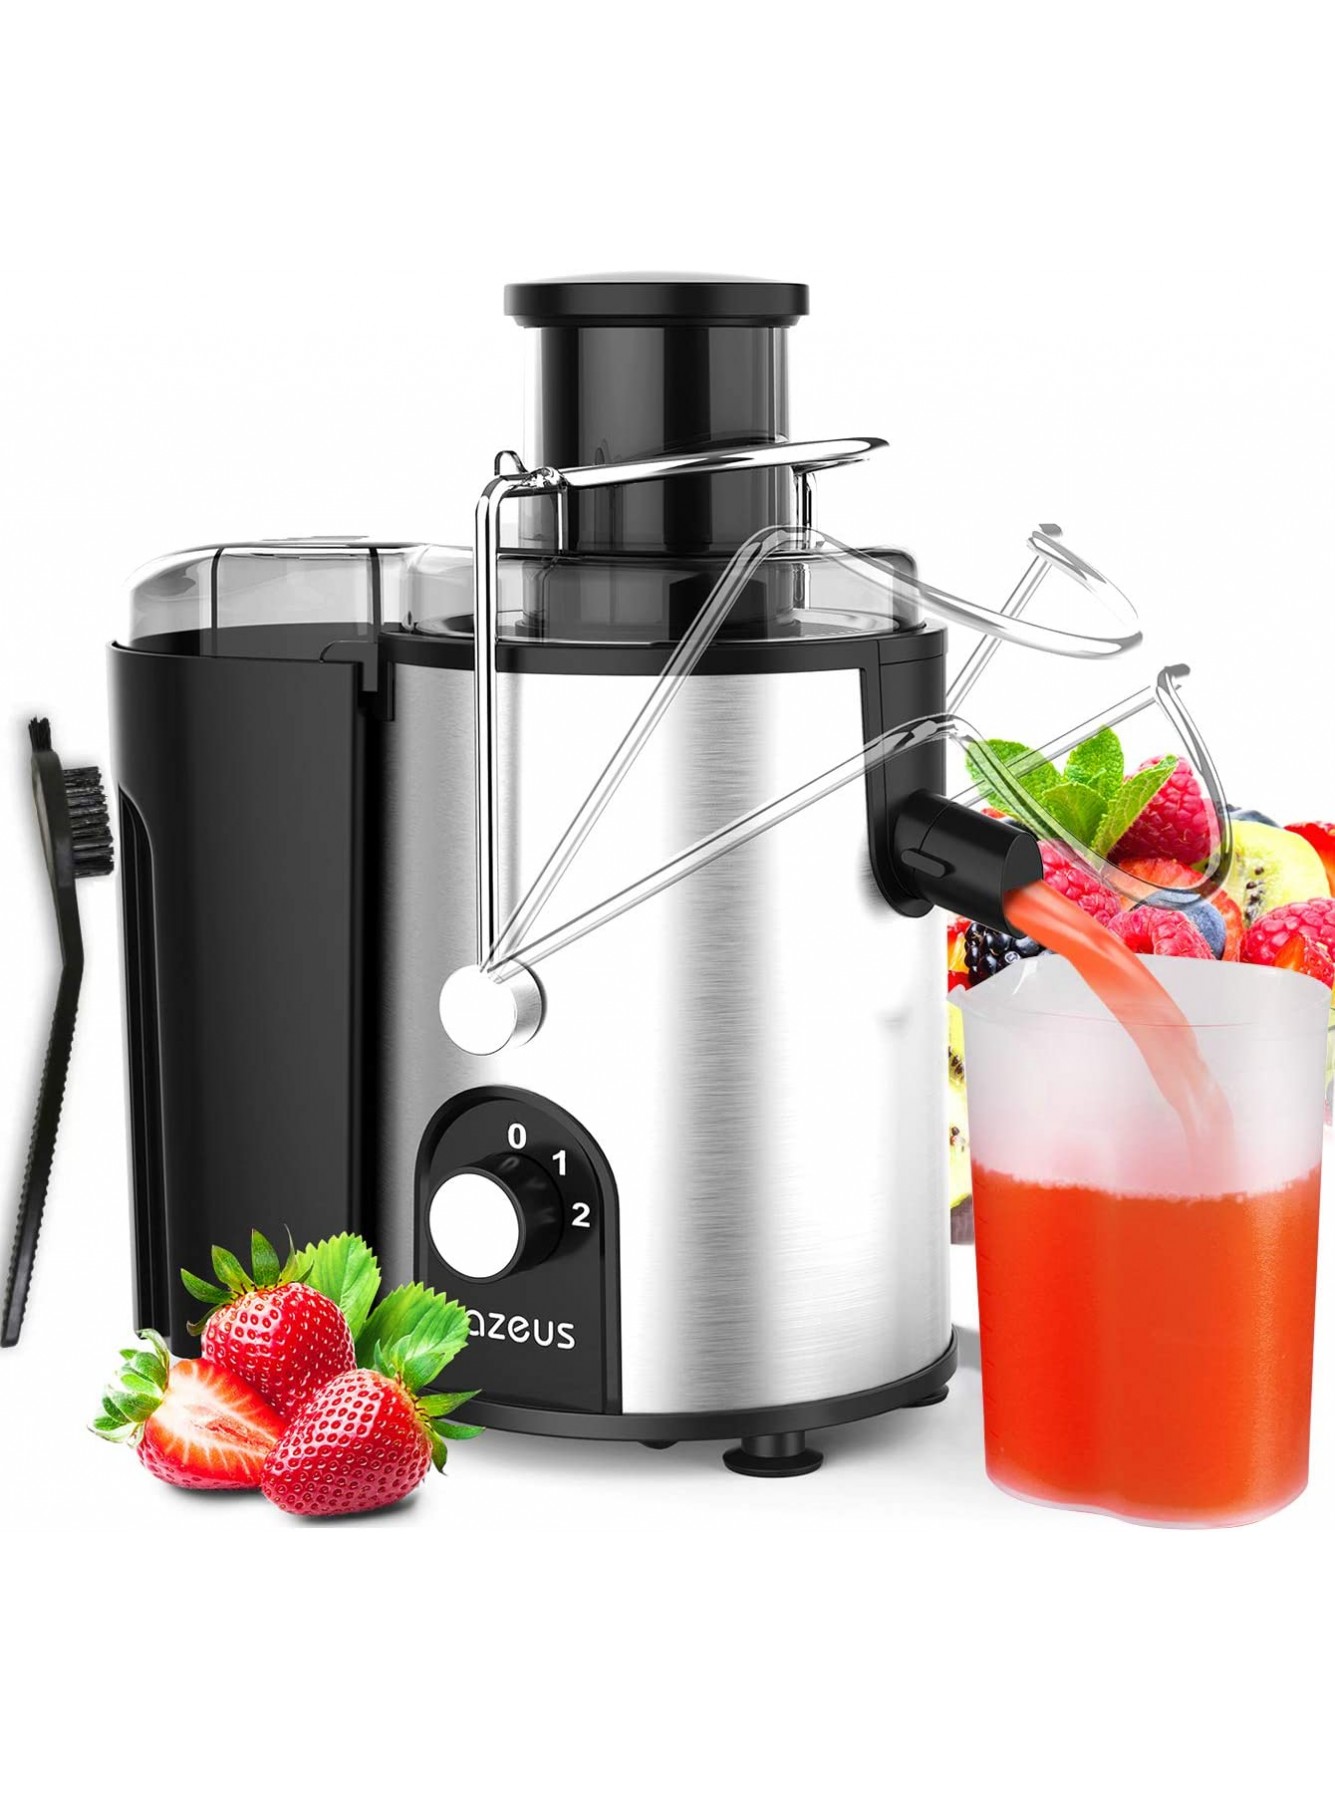 [ Unique Version] AZEUS Centrifugal Juicer Machines Juice Extractor with Germany-Made 163 Chopping Blades Titanium Reinforced & 2-Layer Centrifugal Bowl High Juice Yield Easy to Clean Anti-Drip,100% BPA-Free ETL Listed Catcher & Brush Included B07